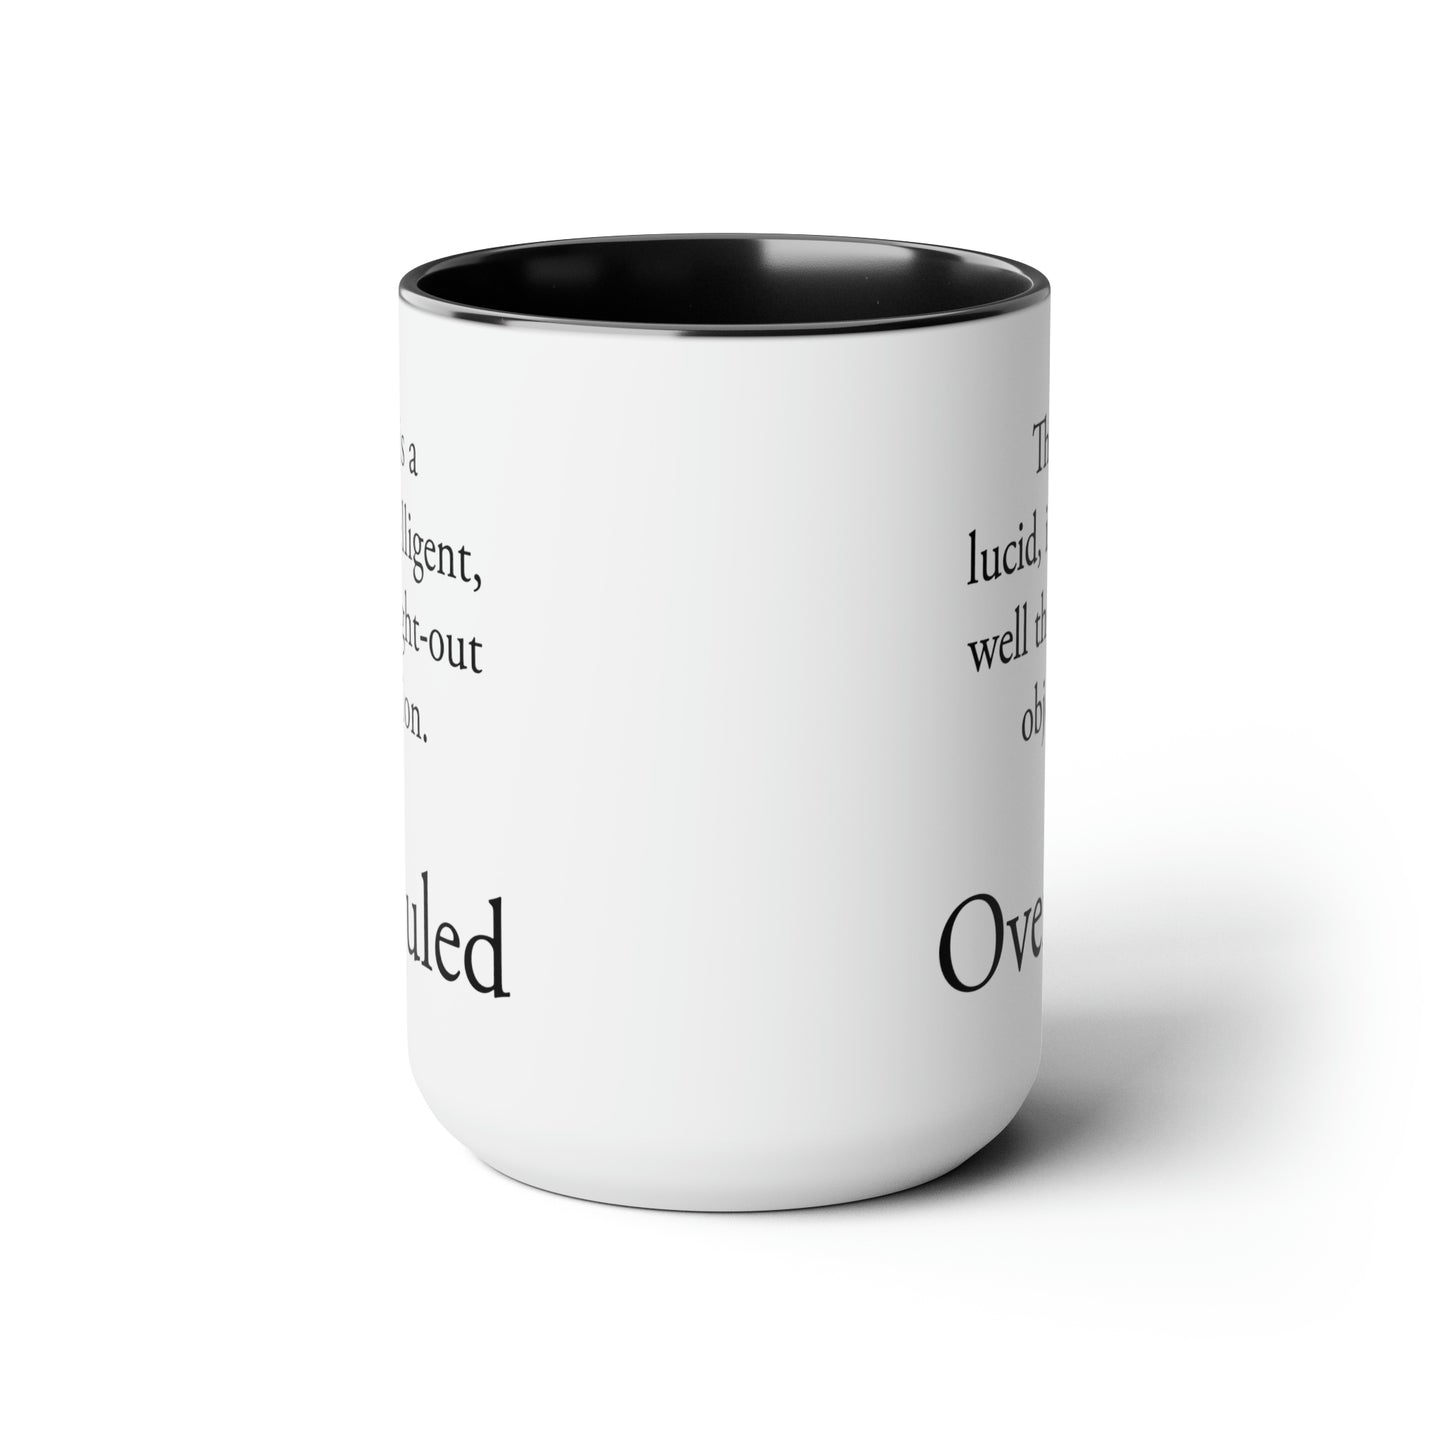 Overruled Coffee Mug - Double Sided Black Accent White Ceramic 15oz by TheGlassyLass